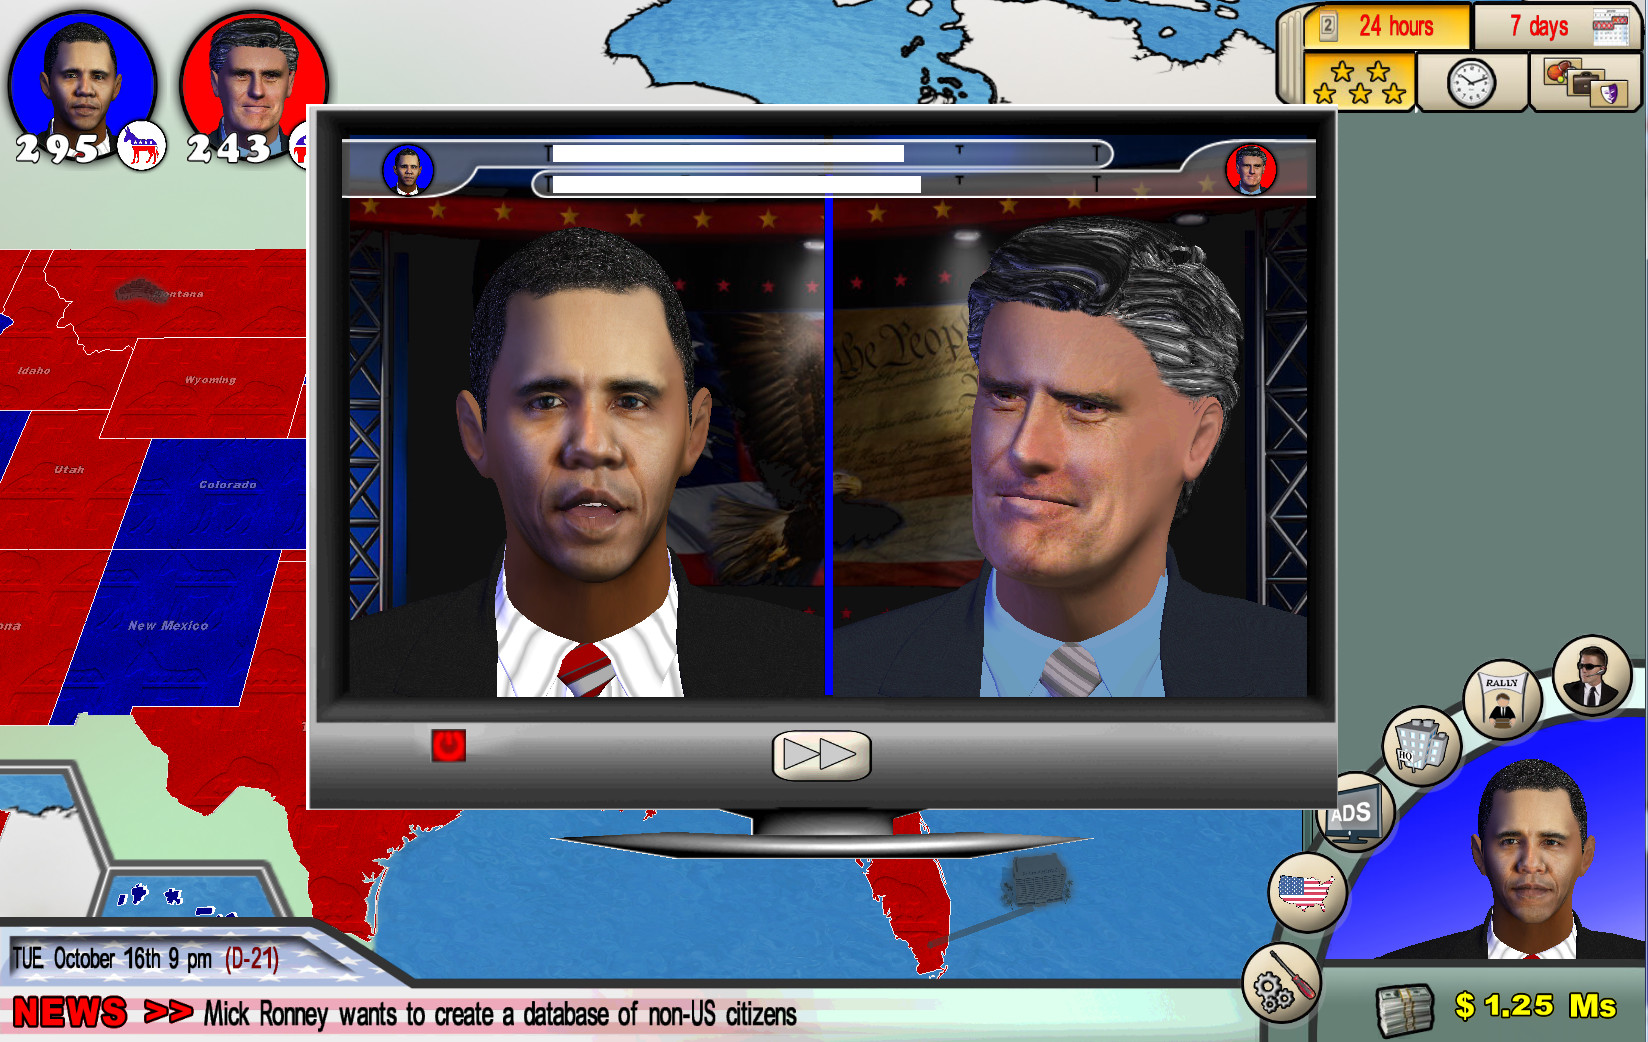 The Race for the White House screenshot